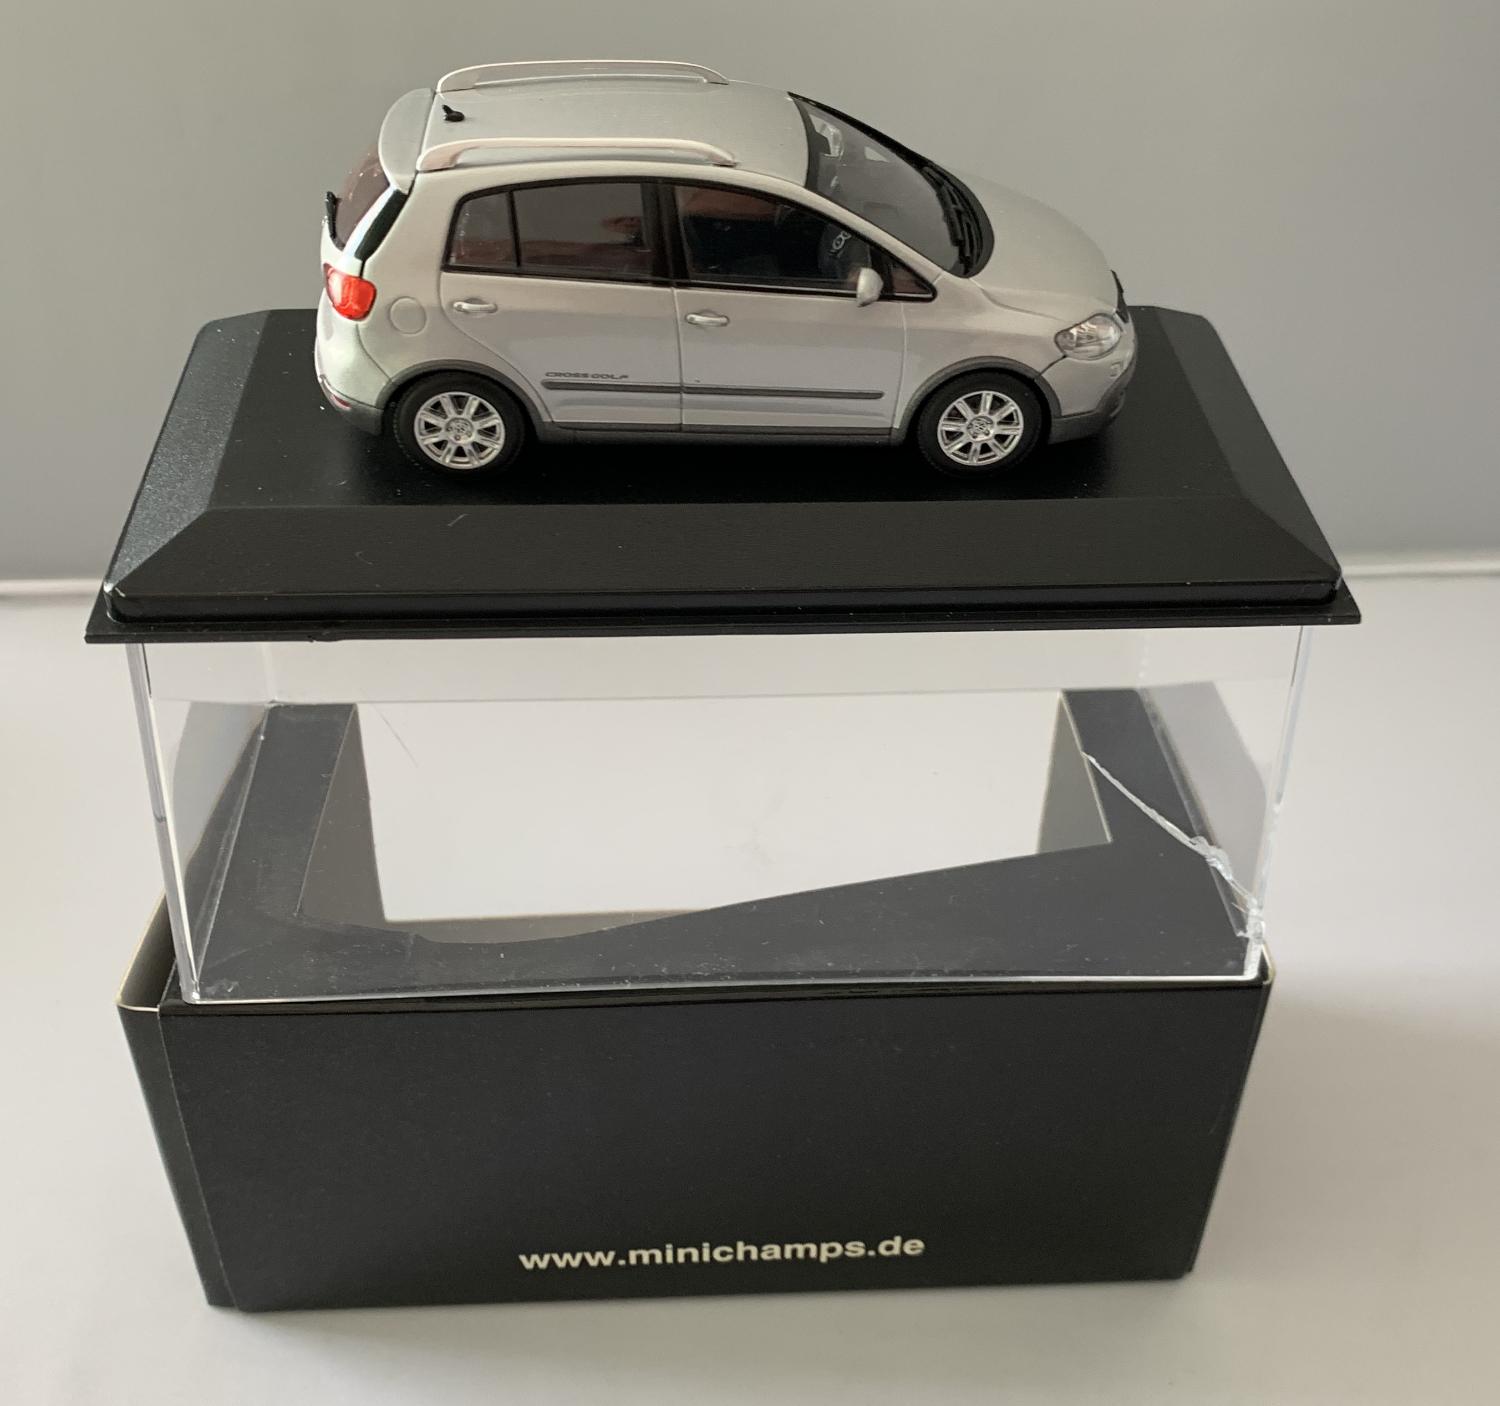 VW Cross Golf 2006 in silver 1:43 scale Minichamps limited edition model, clearance offers